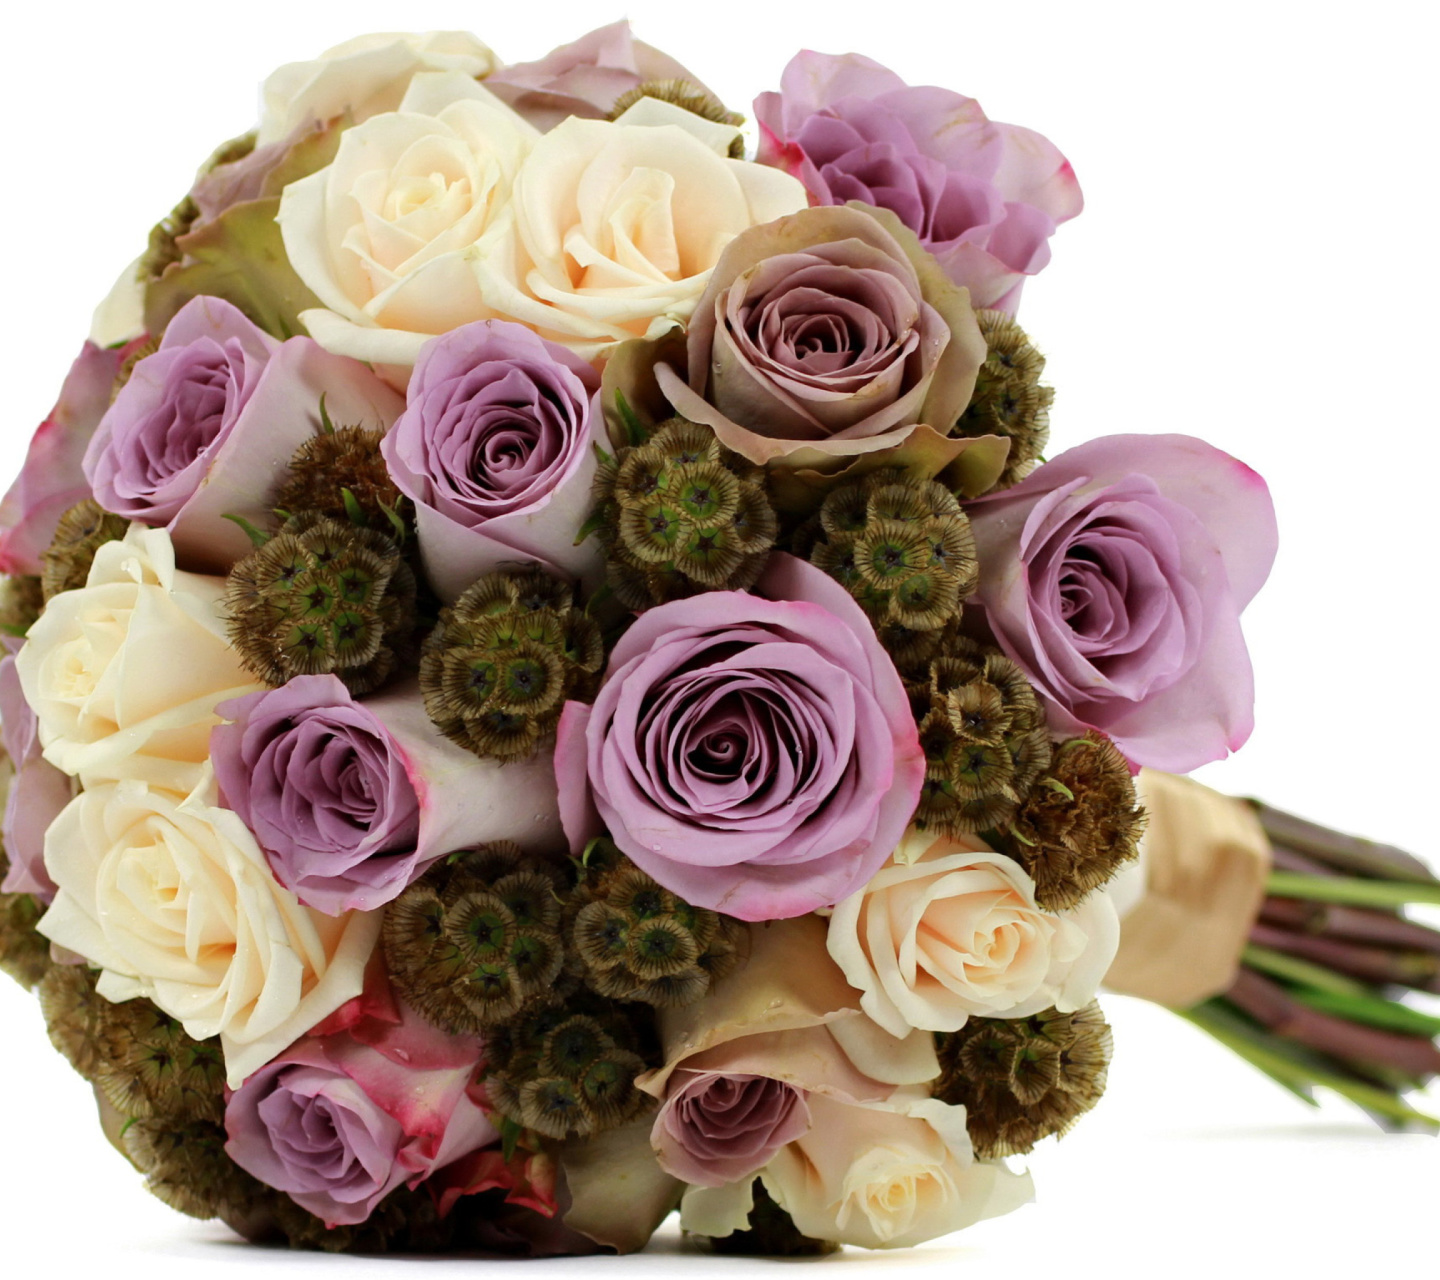 Das Bouquet with lilac roses Wallpaper 1440x1280